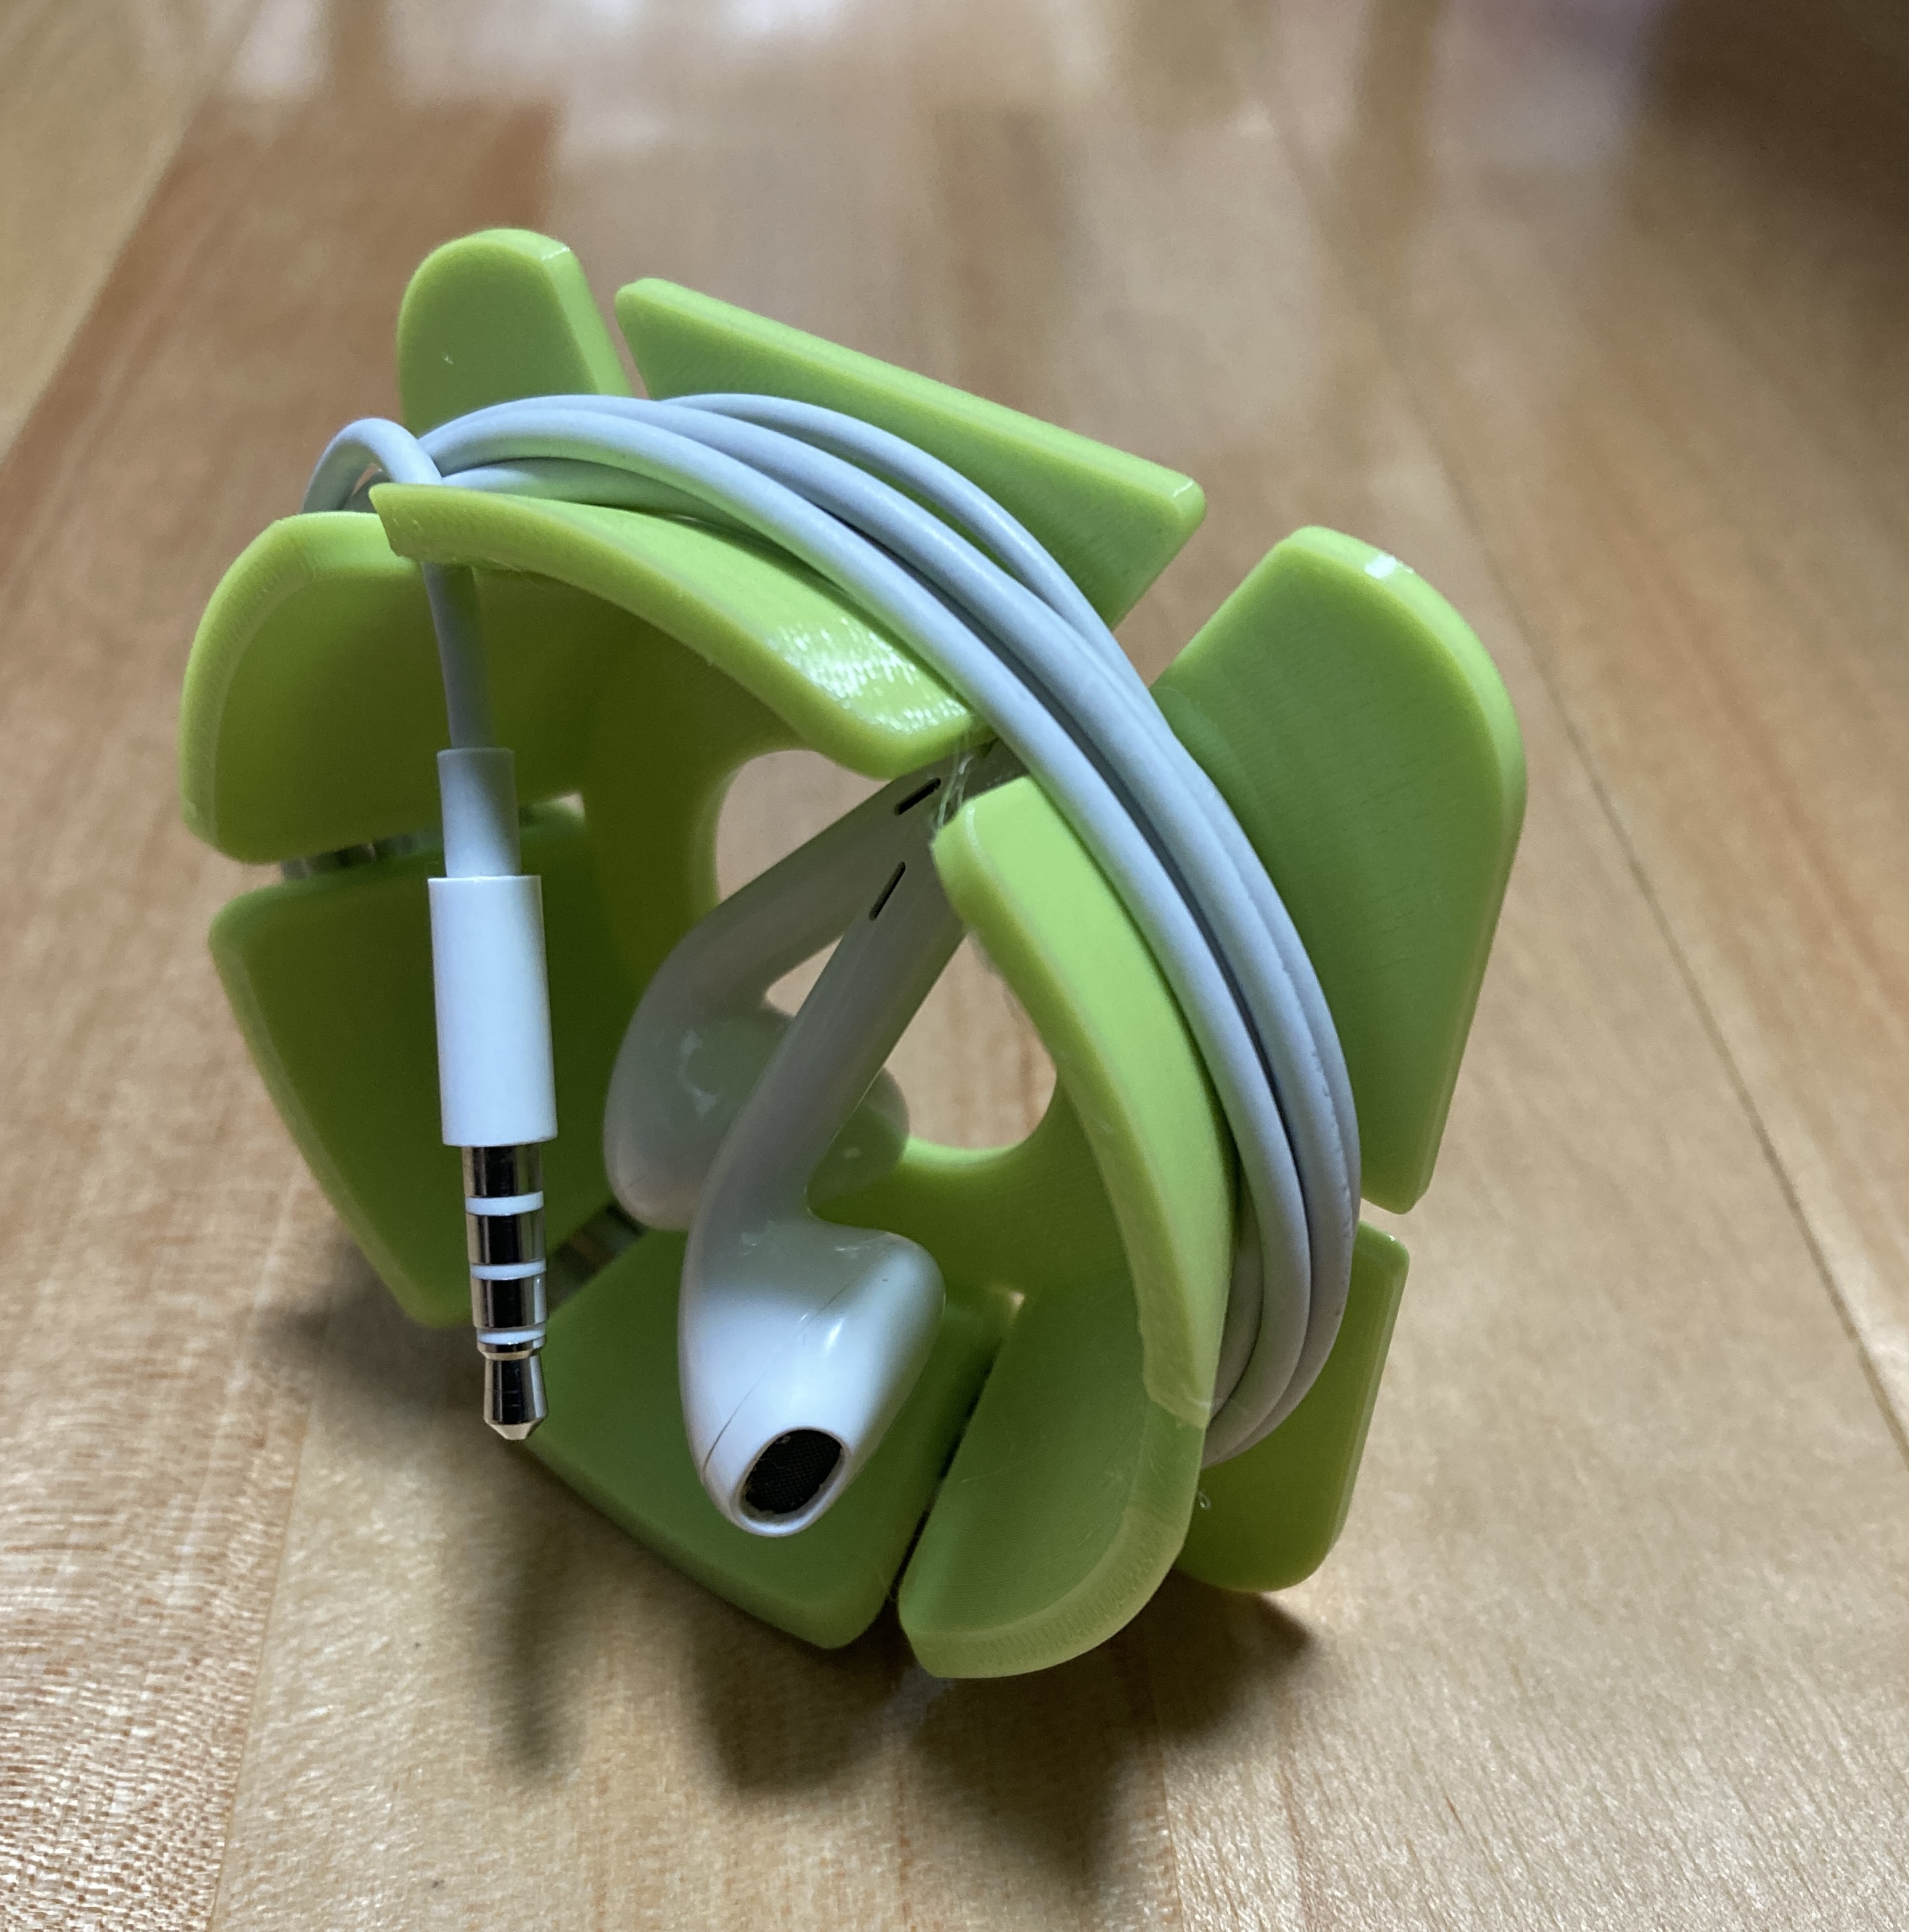 Smart earphone cable holder by Kazu-chan